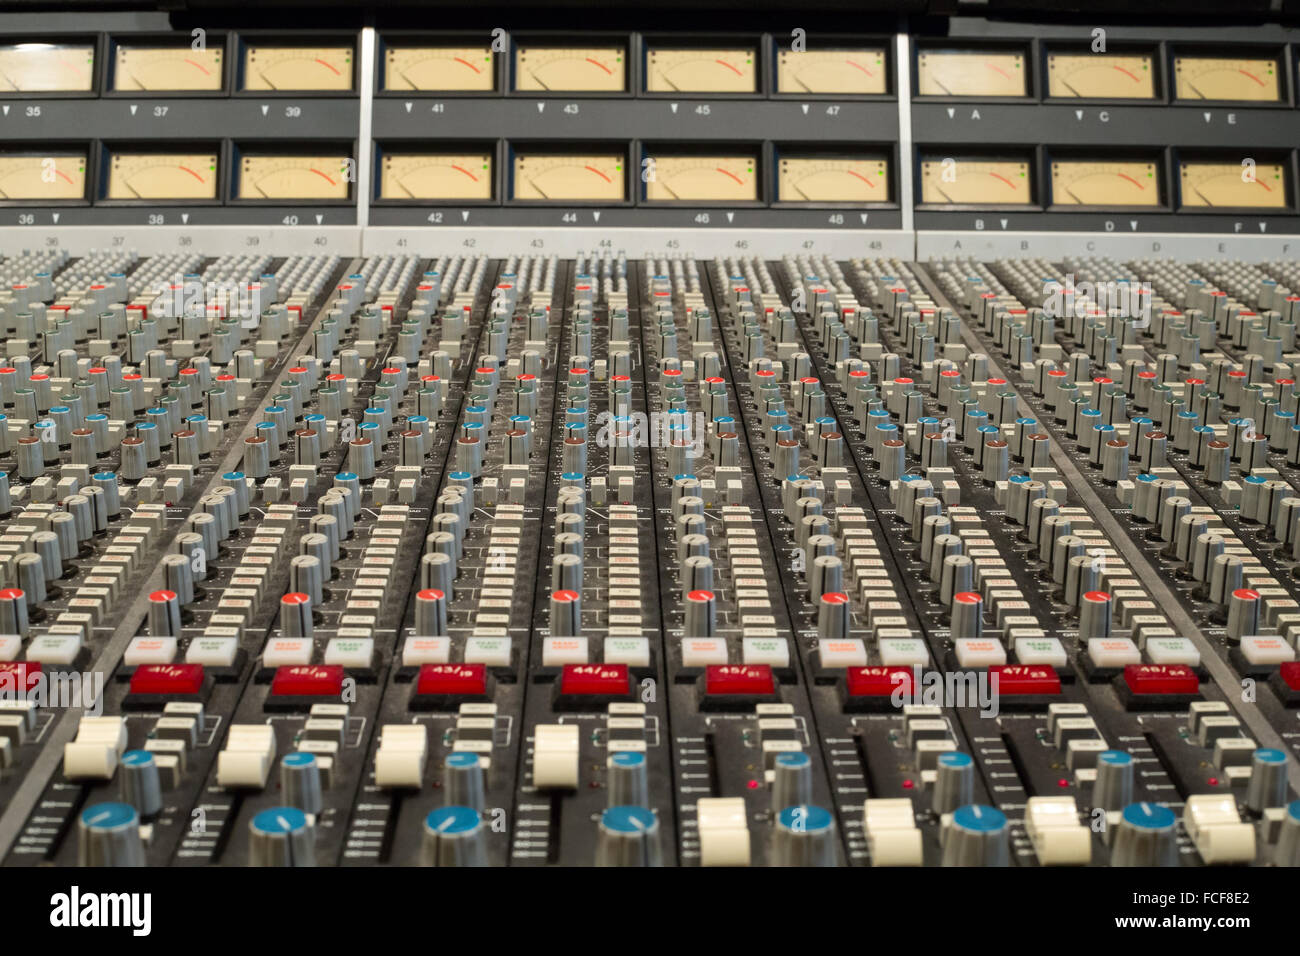 ssl e series sound mixing desk showing buttons, knobs and controls Stock Photo